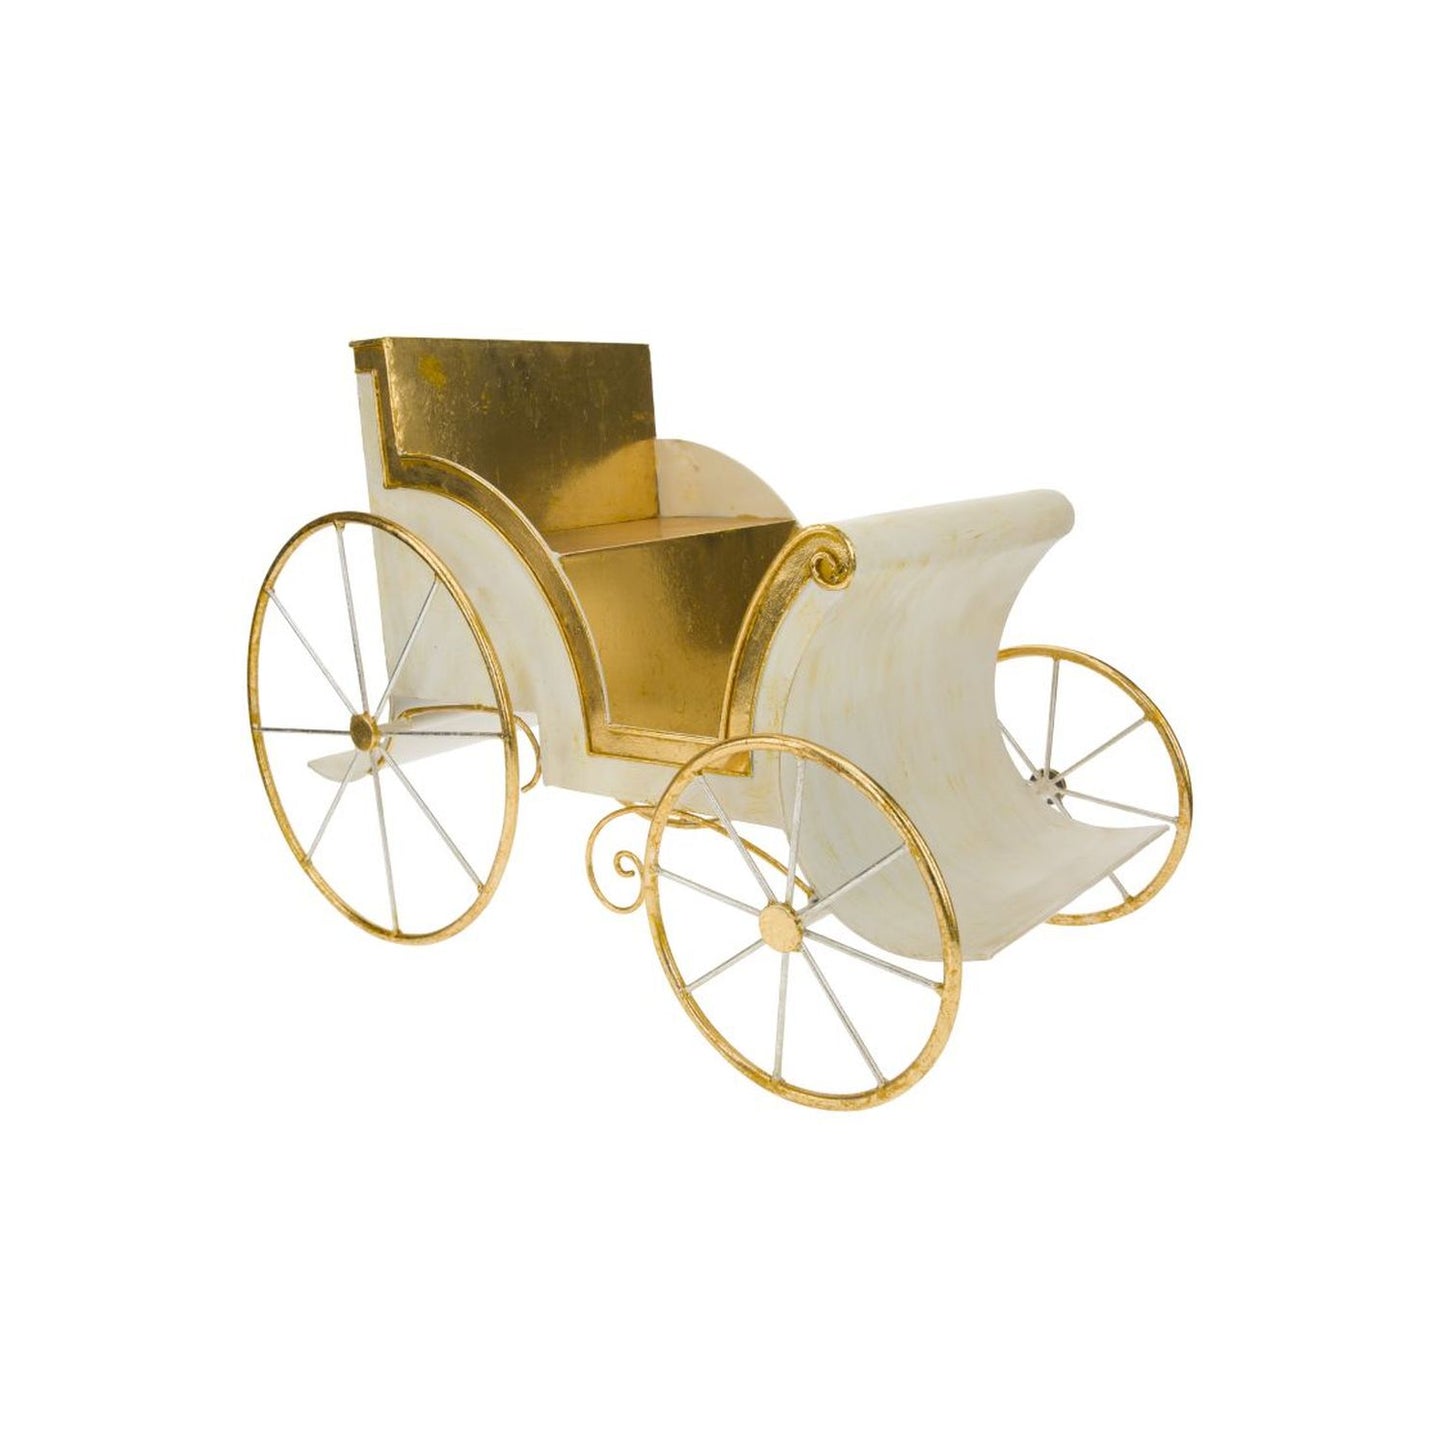 Mark Roberts 2018 Carriage - 23 X 17.5 Inches, Ivory